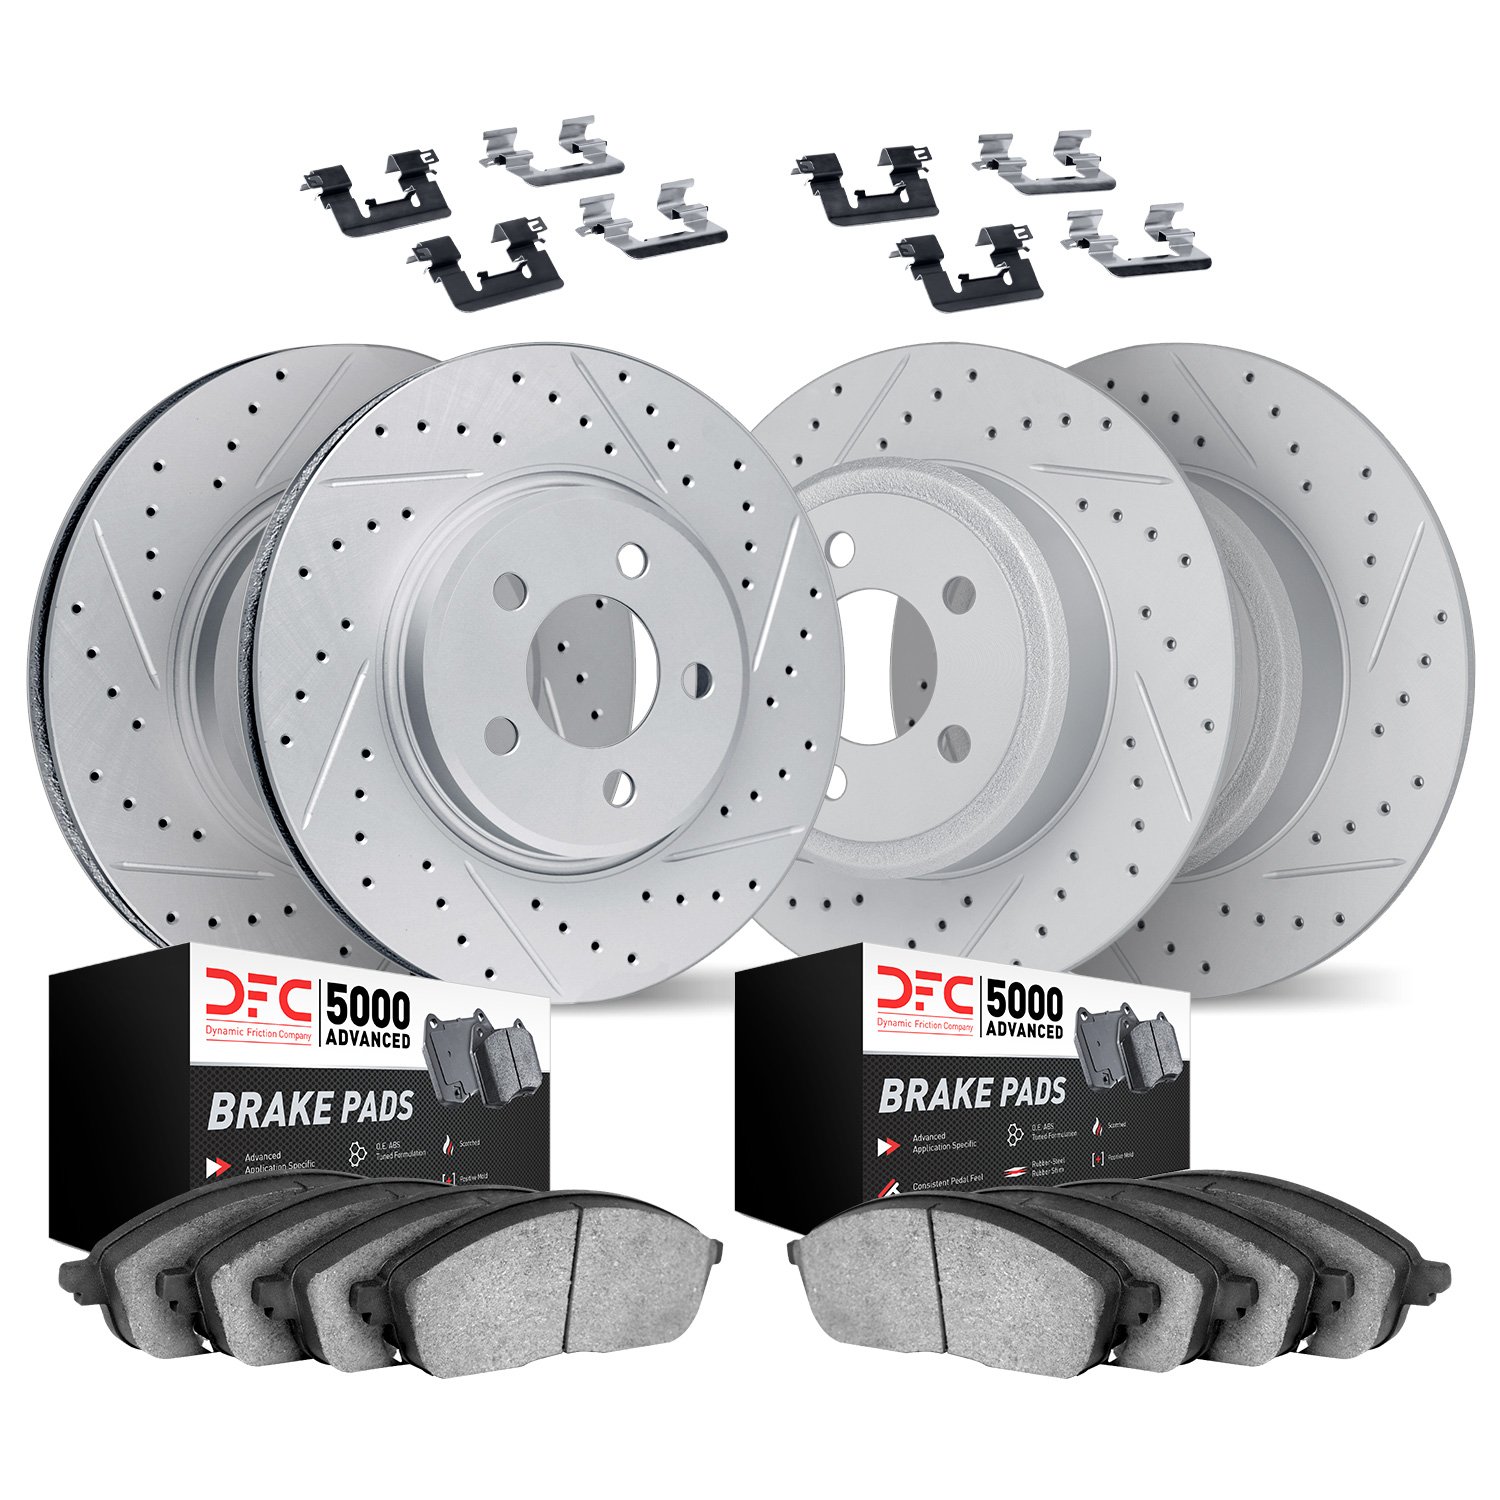 2514-58000 Geoperformance Drilled/Slotted Rotors w/5000 Advanced Brake Pads Kit & Hardware, 2009-2014 Acura/Honda, Position: Fro